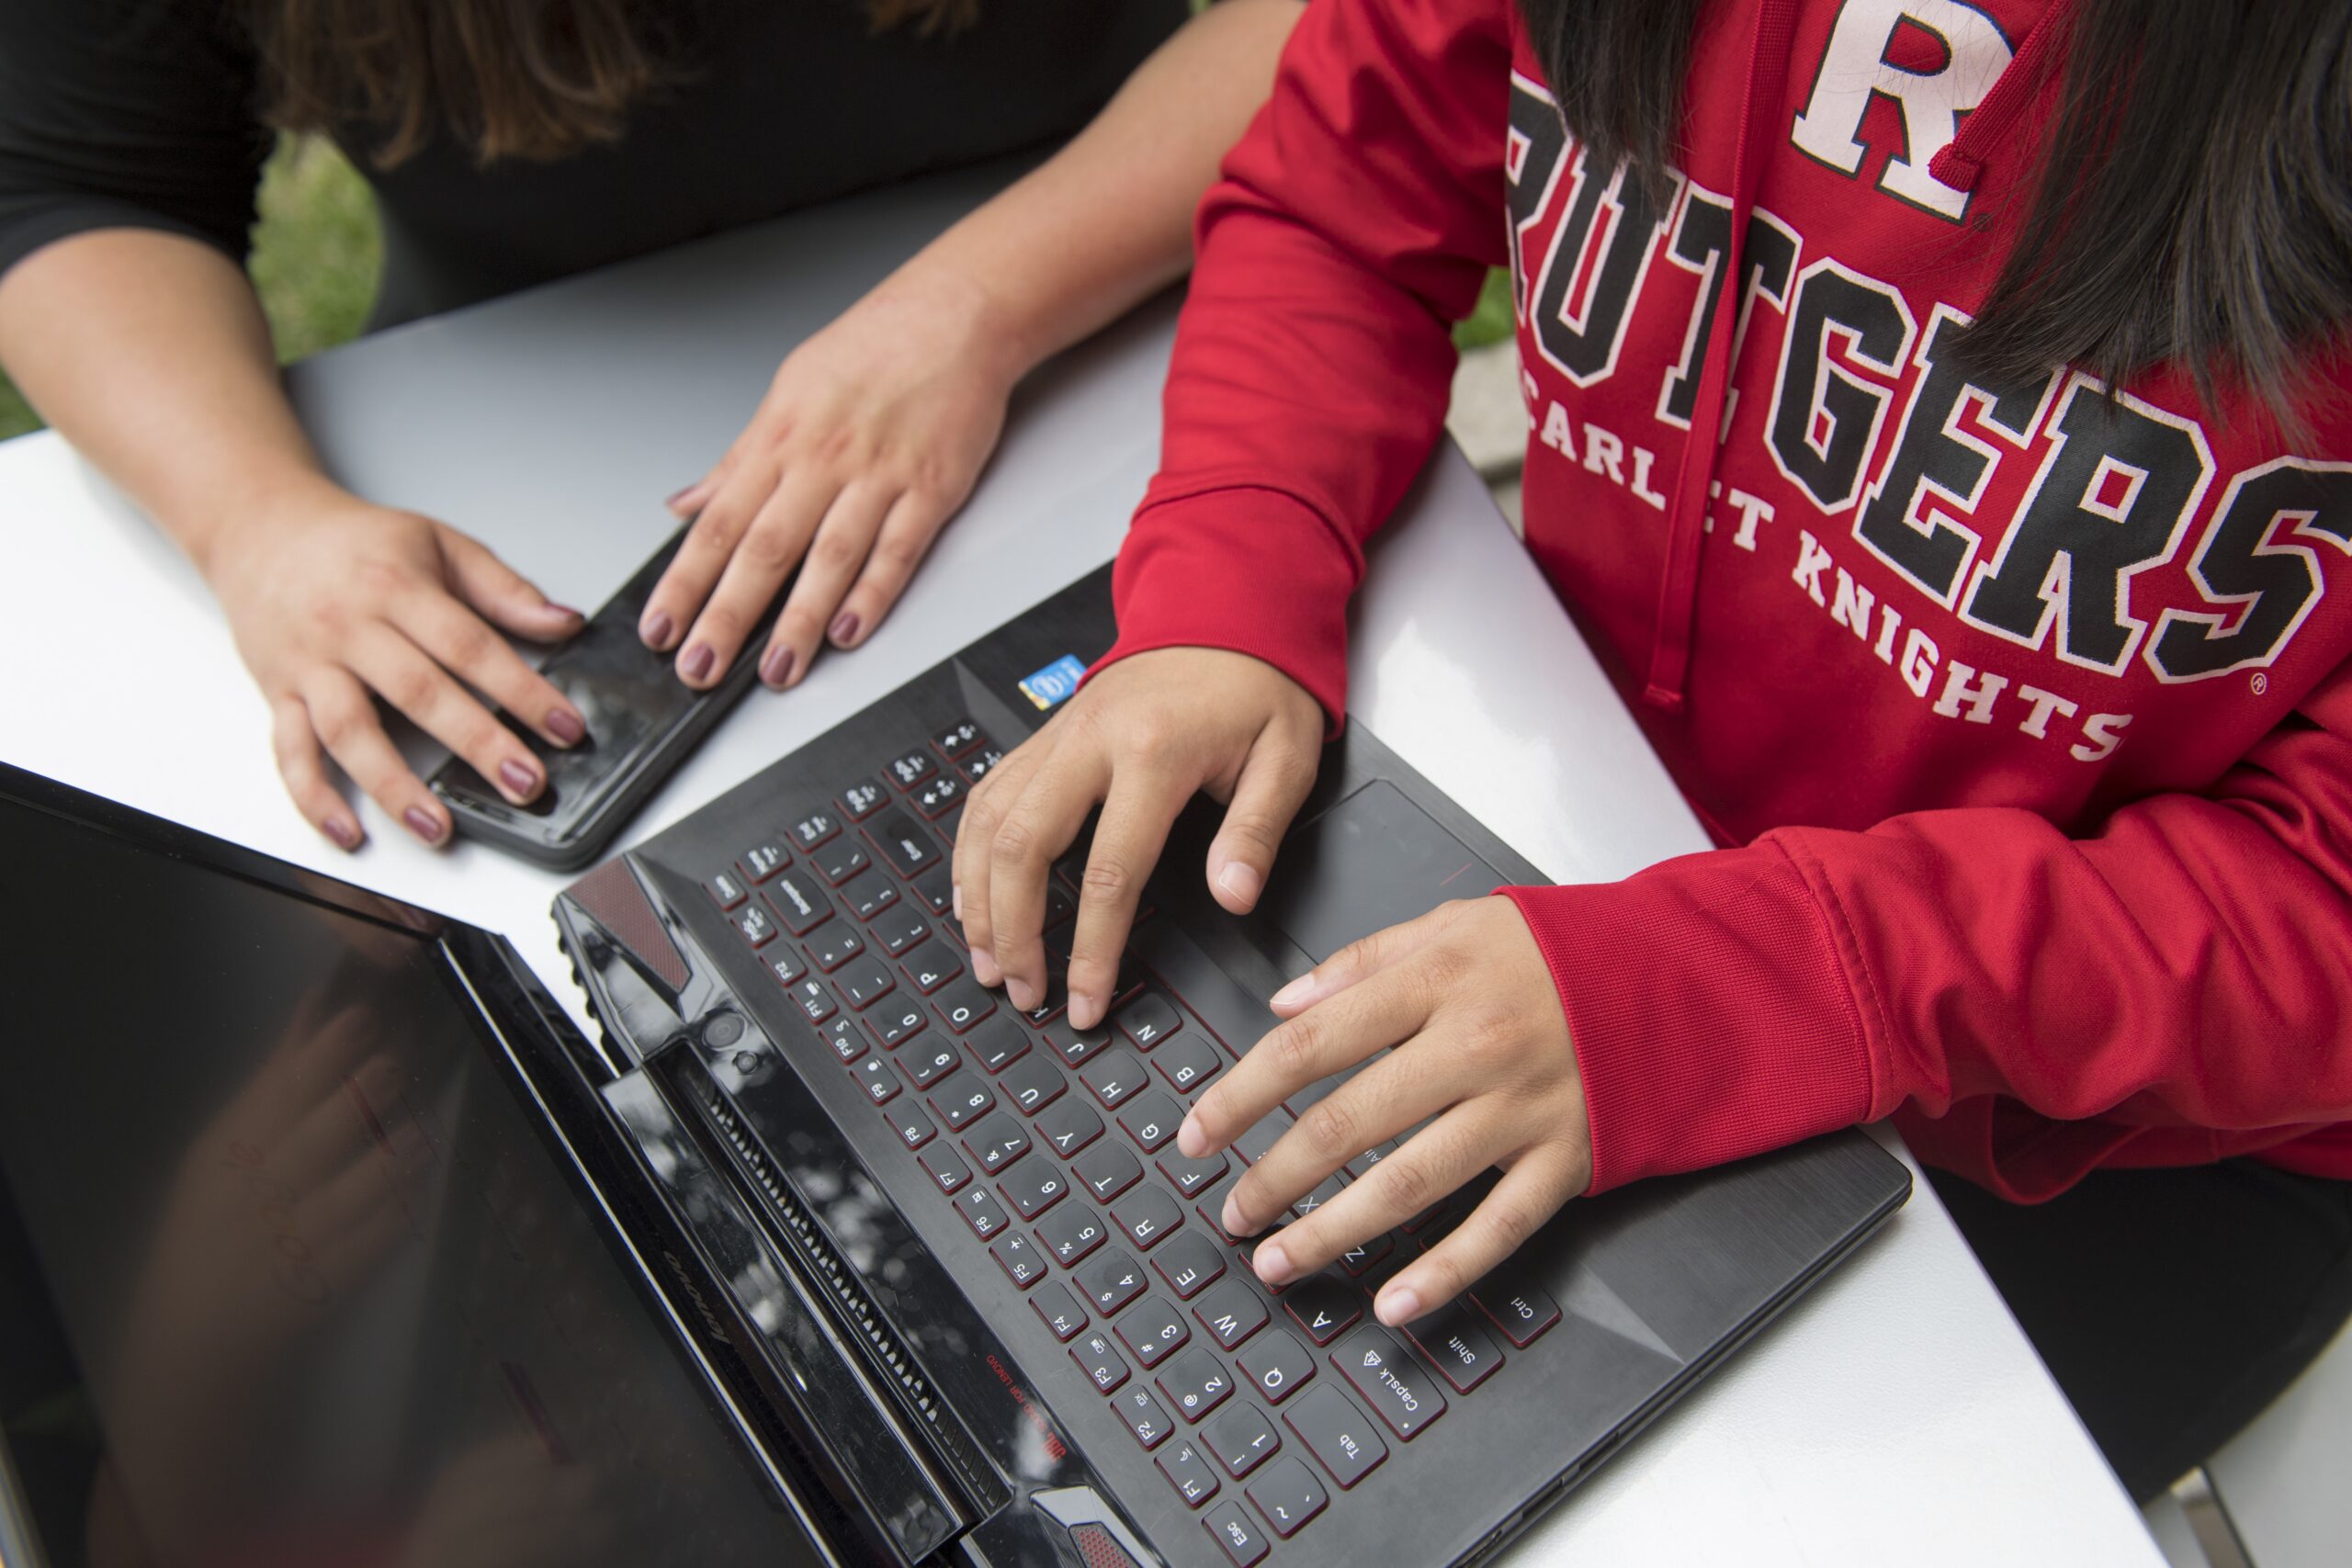 A person in a Rutgers sweatshirt typing on a laptop while someone sits next to them, holding a phone